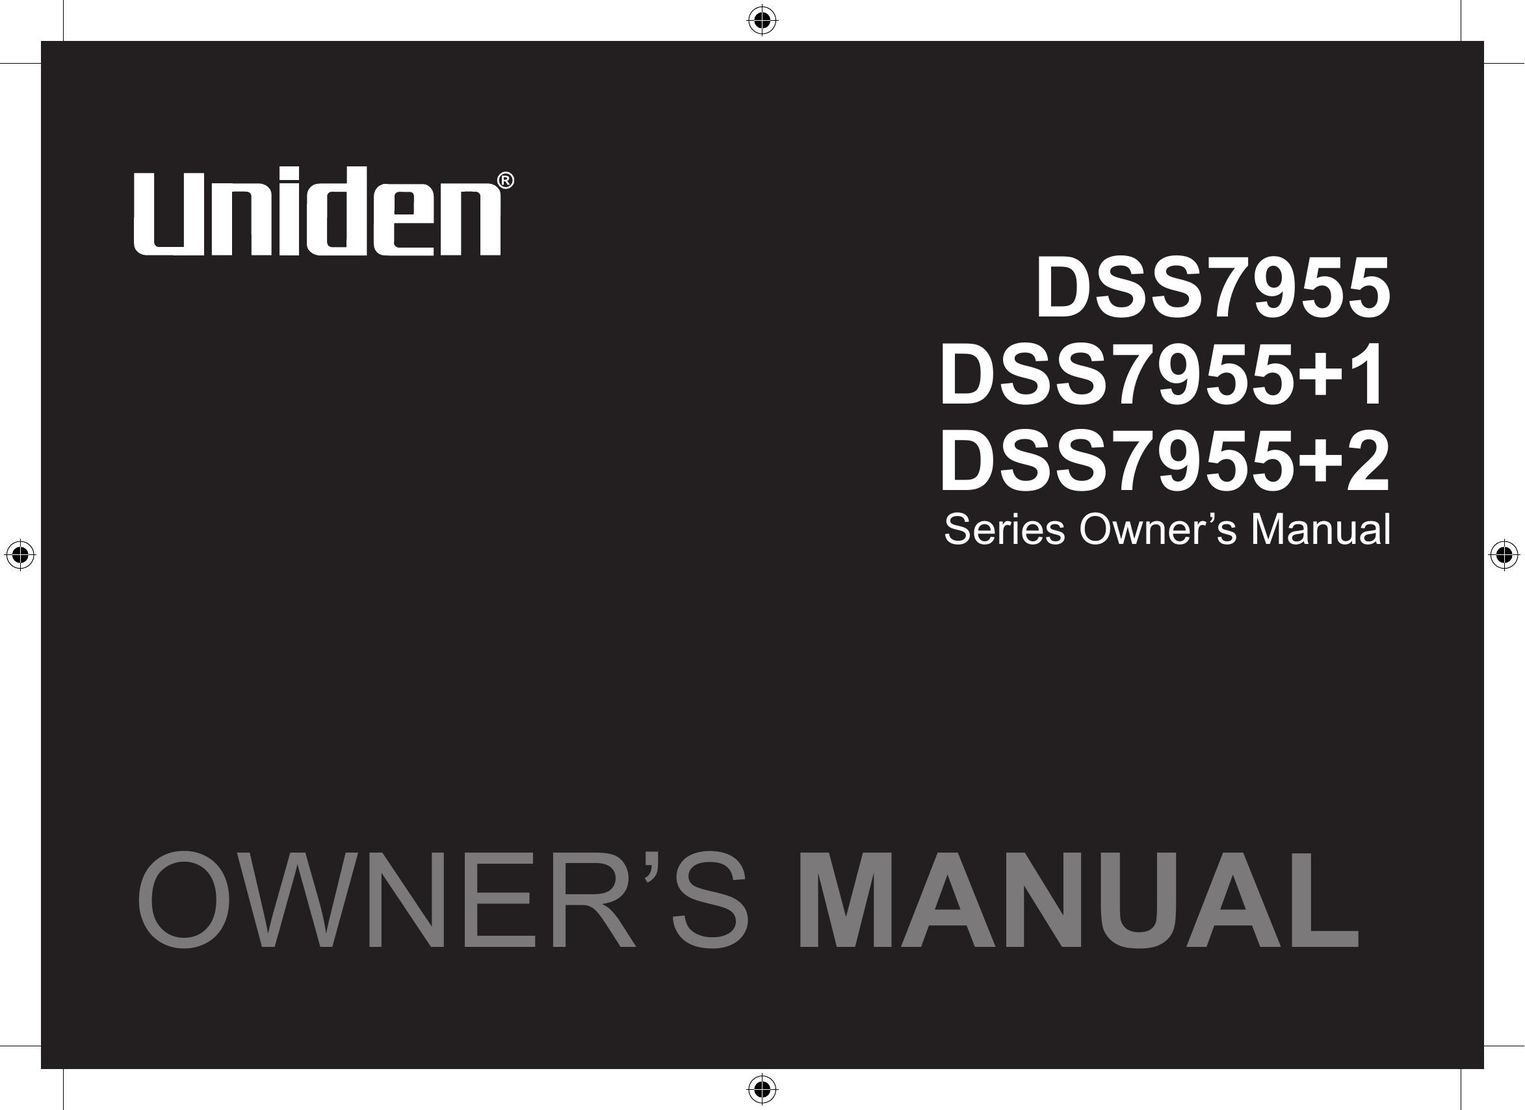 Uniden DSS7955+1 Telephone User Manual